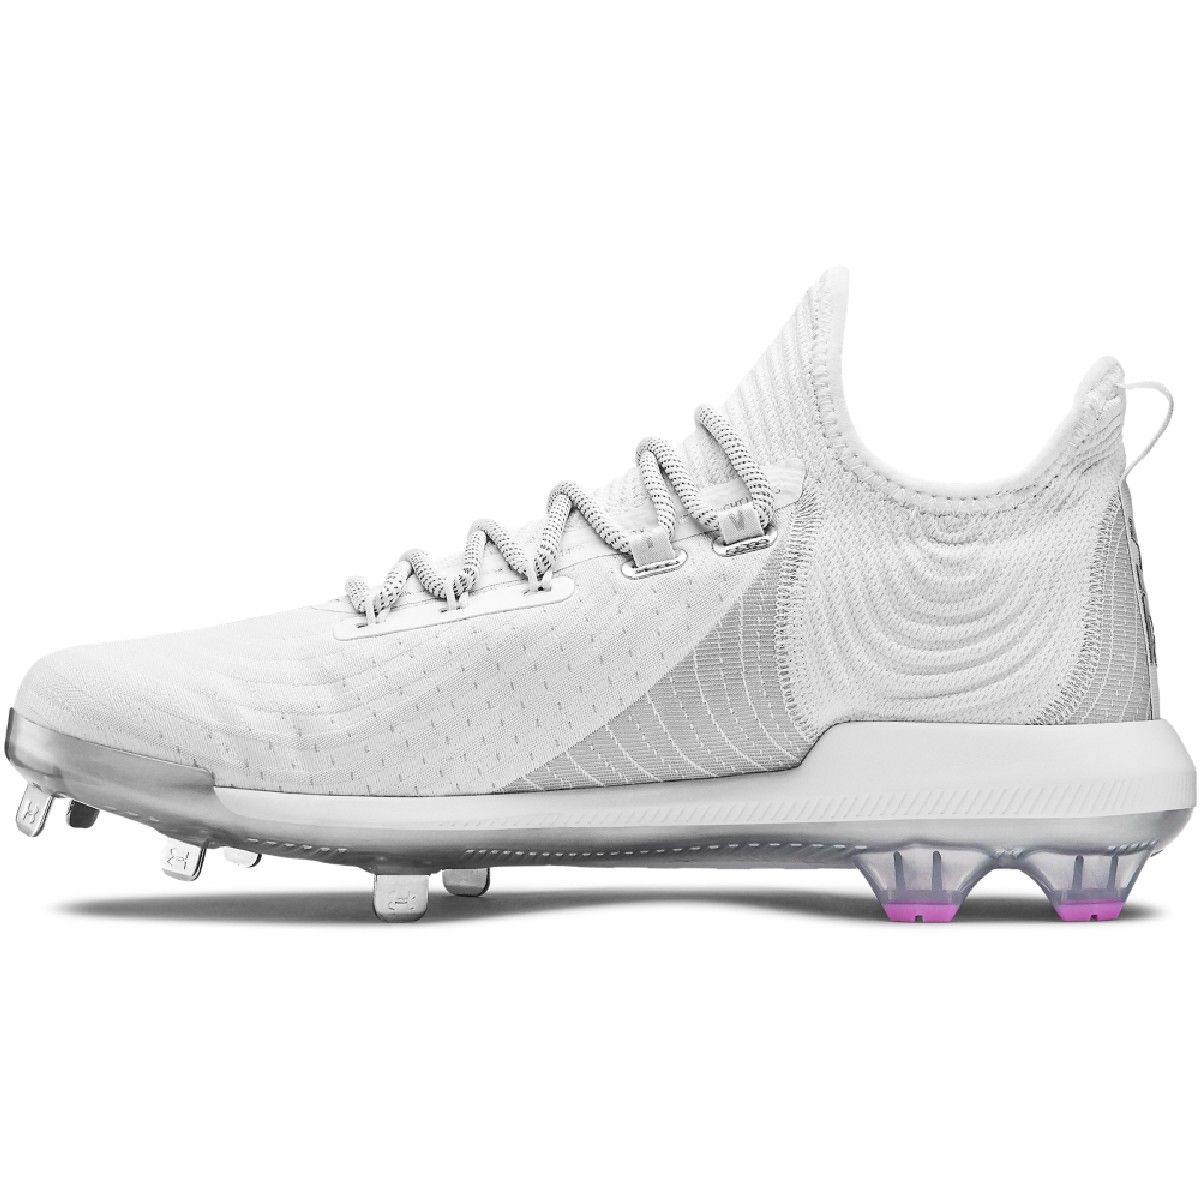 Under Armour Bryce Harper 4 Low Men's Metal Baseball Cleats (White